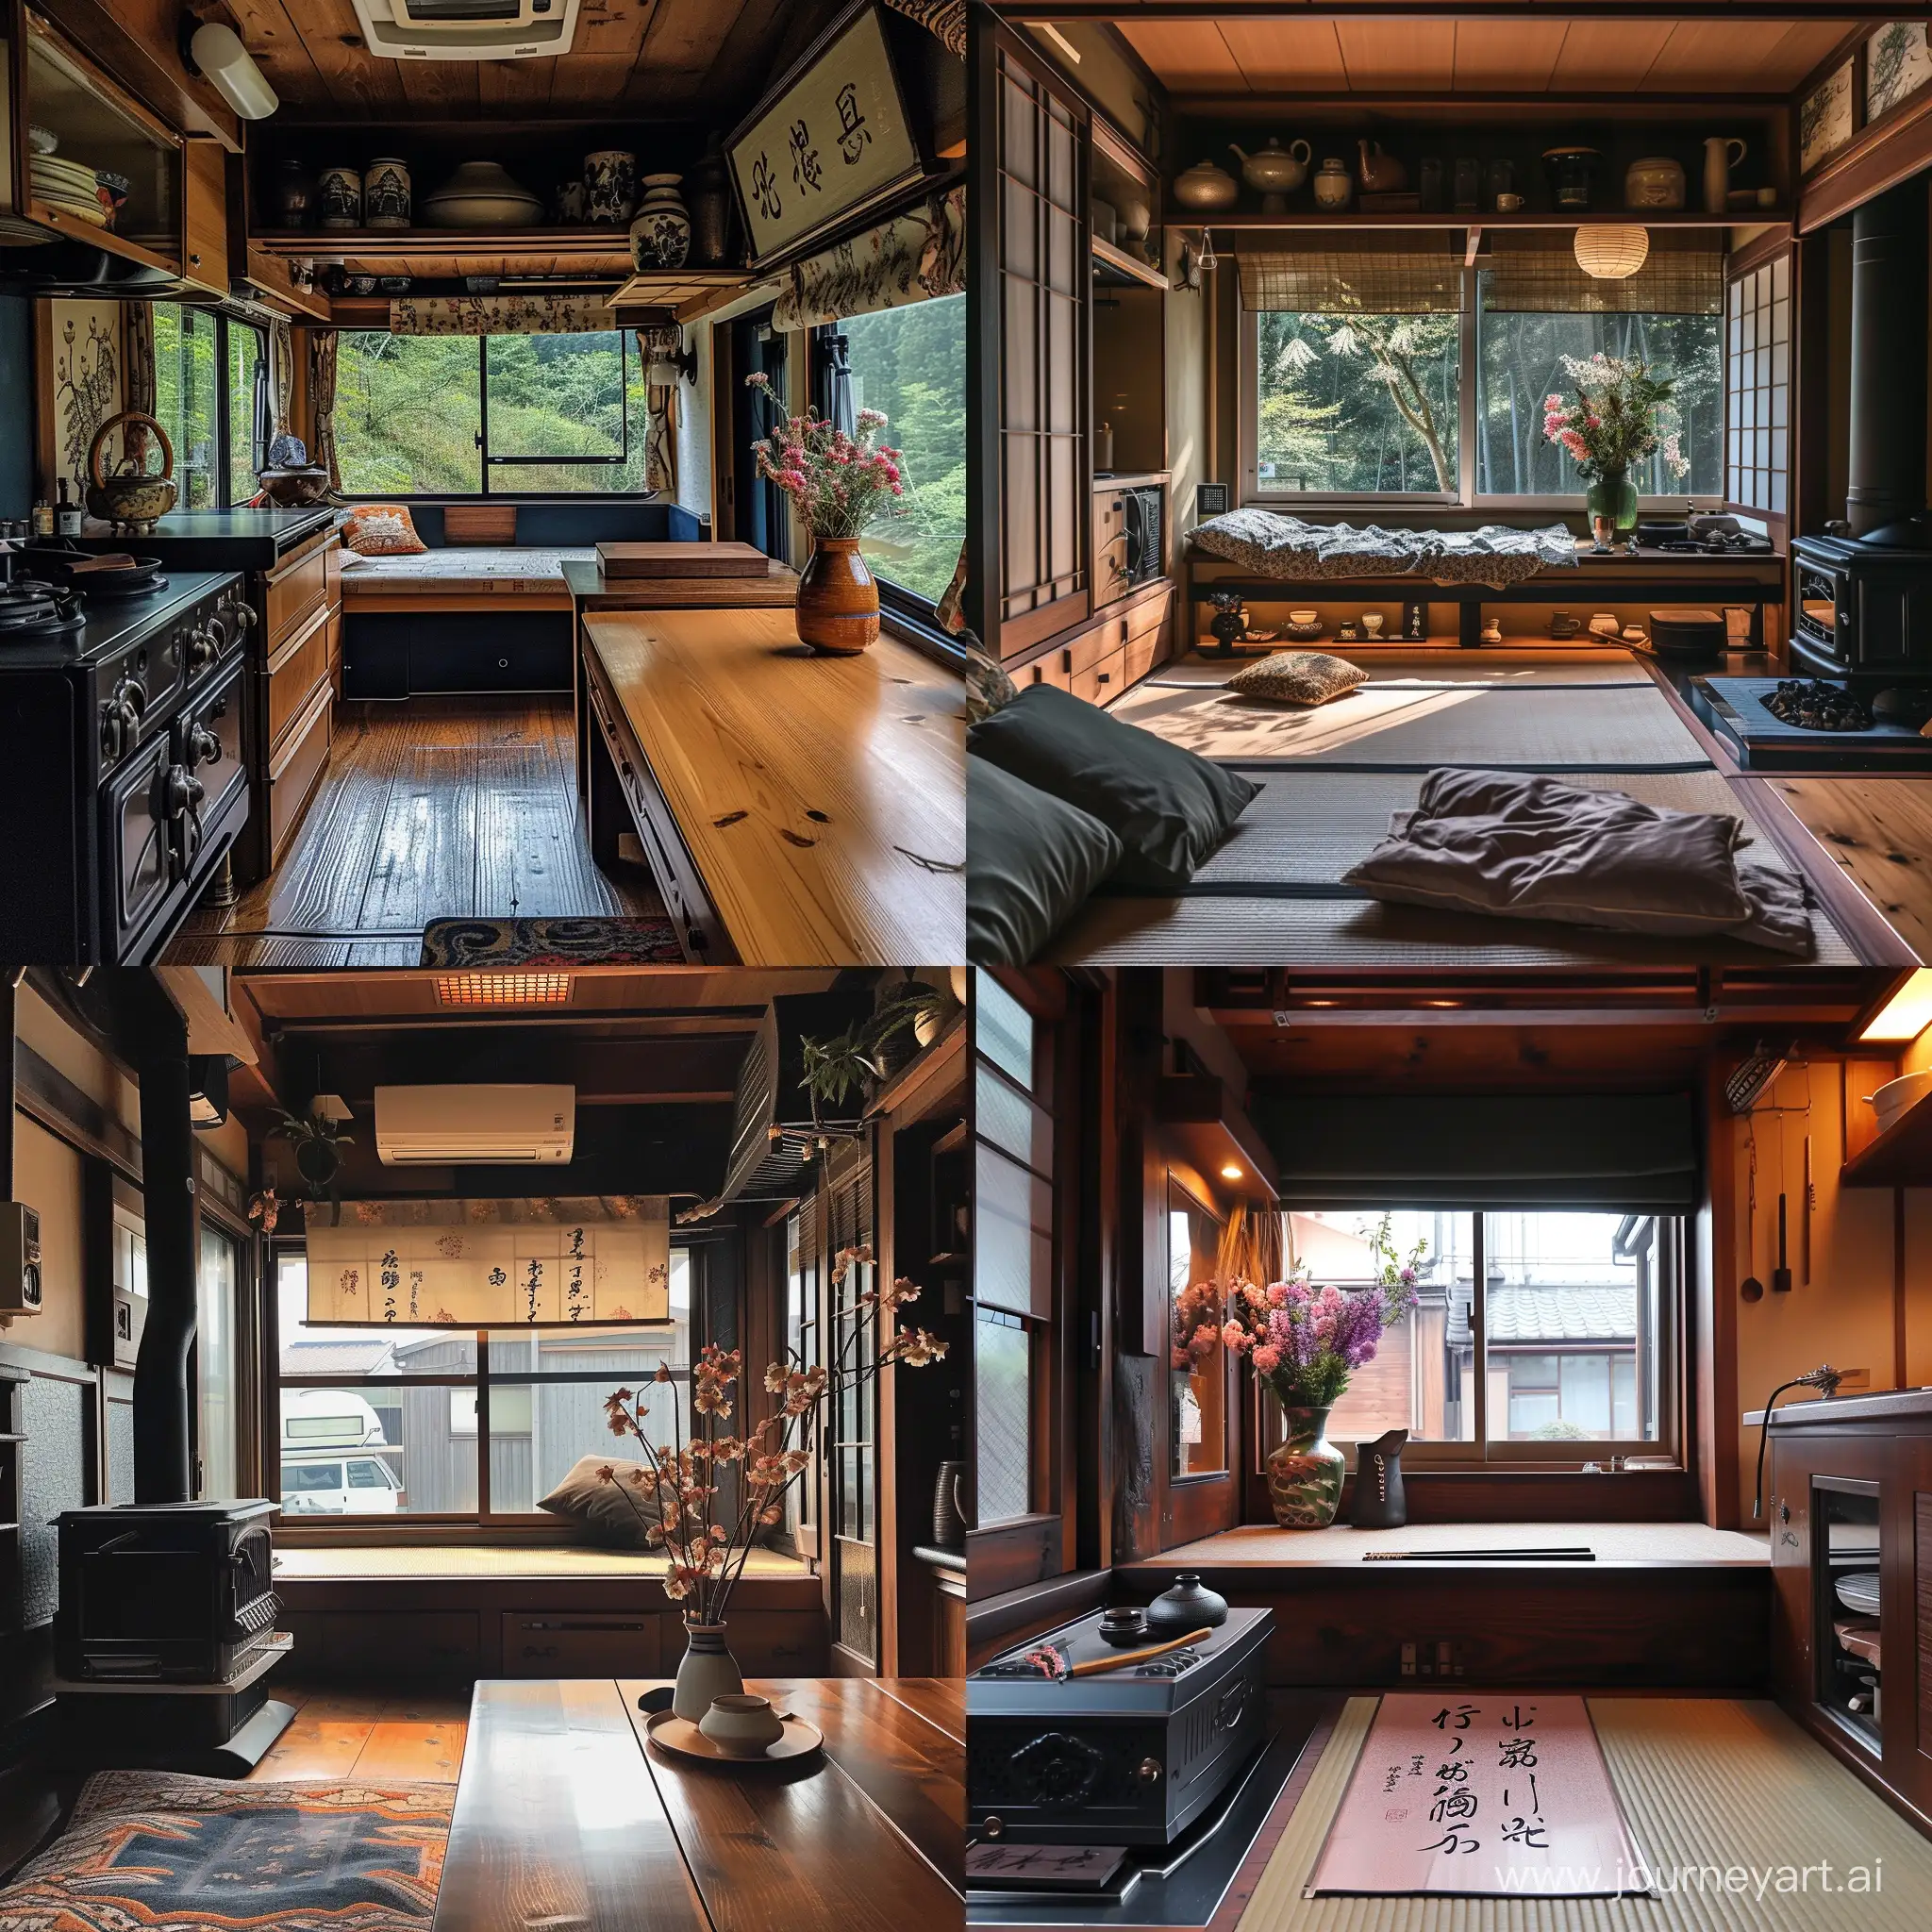 Spacious-Tatami-Tea-Room-in-Ancient-Wooden-RV-with-WabiSabi-Decor